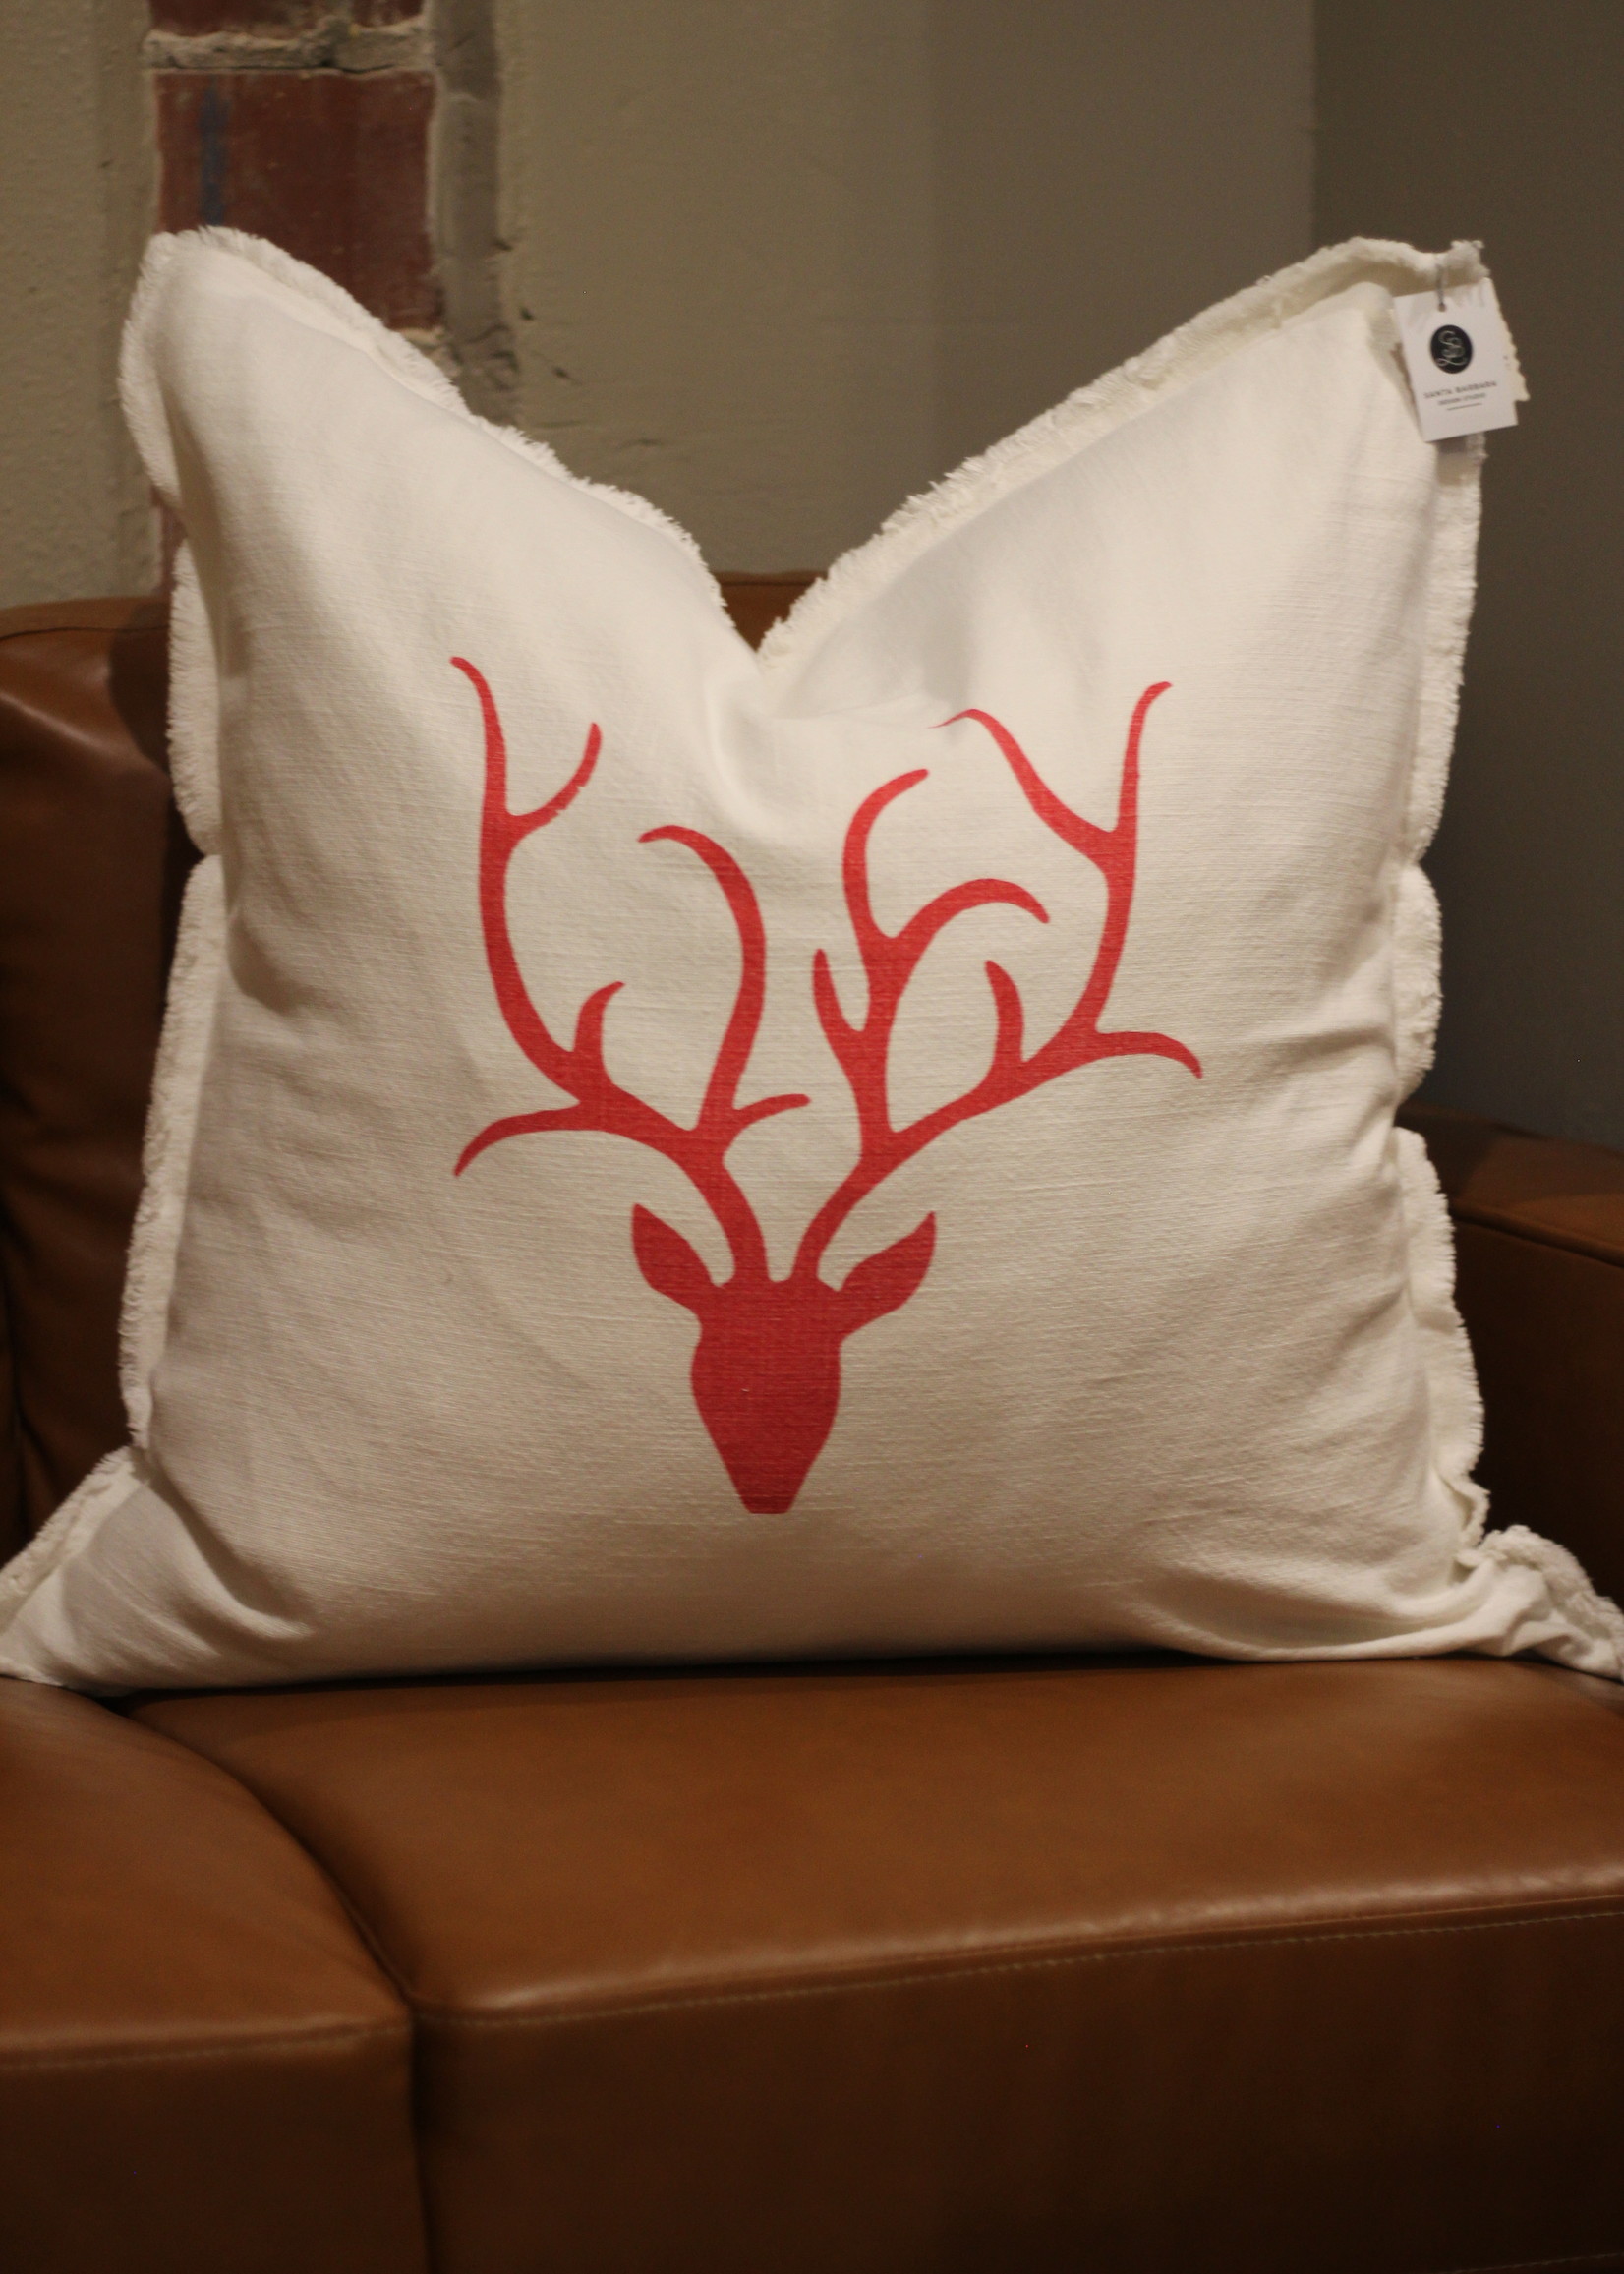 Creative Brands F2F Antlers Euro Pillow